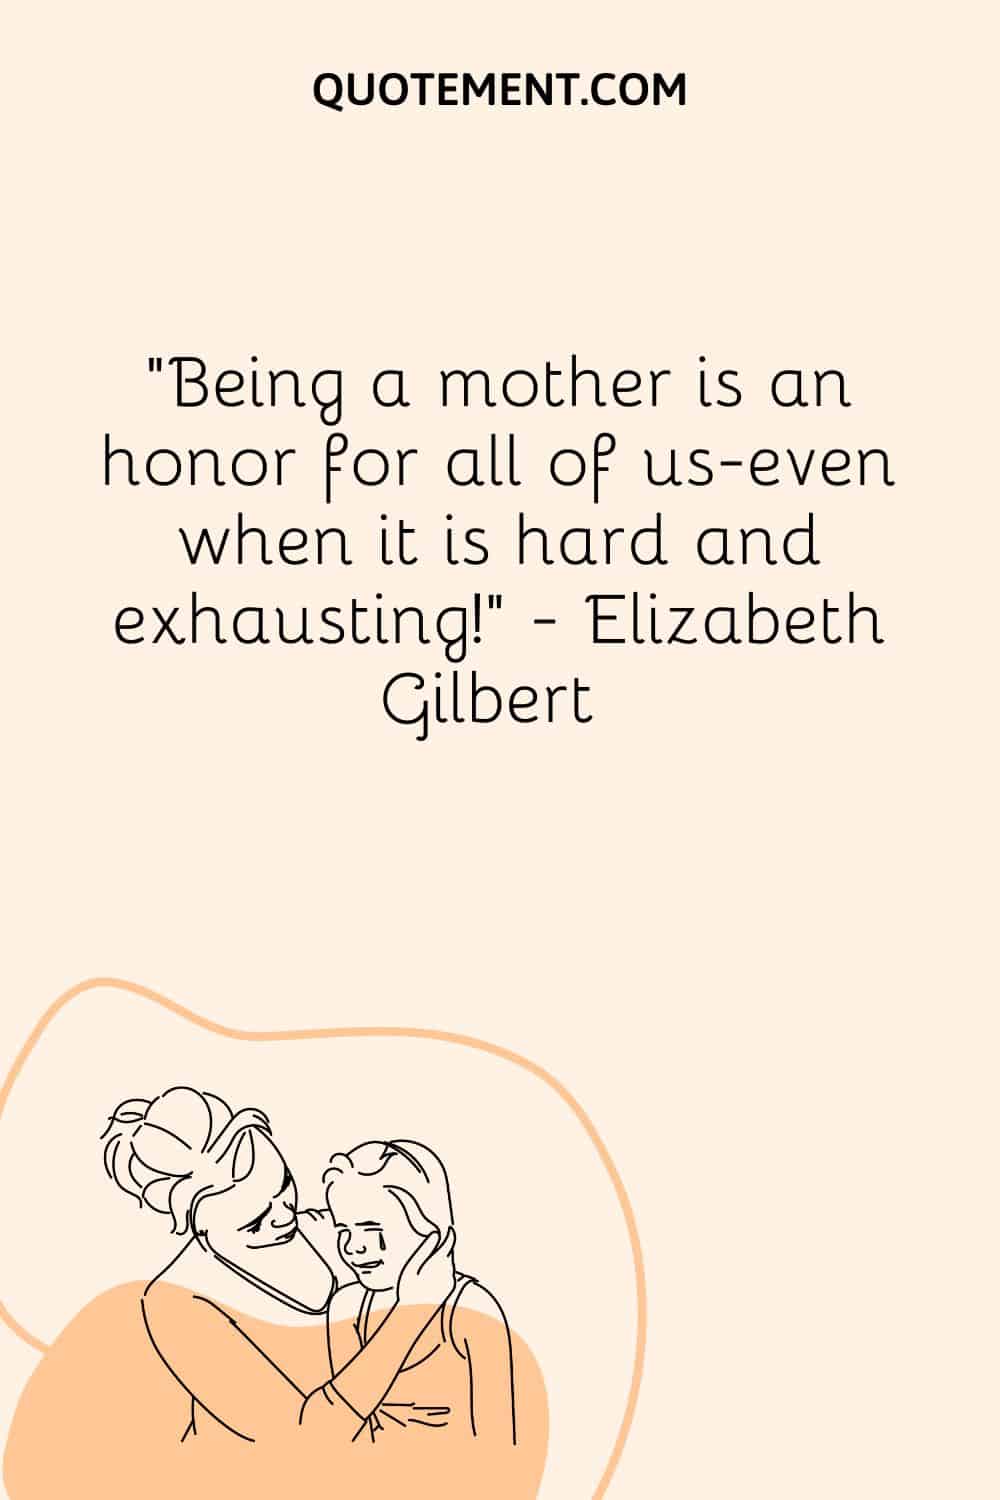 Being a mother is an honor for all of us—even when it is hard and exhausting